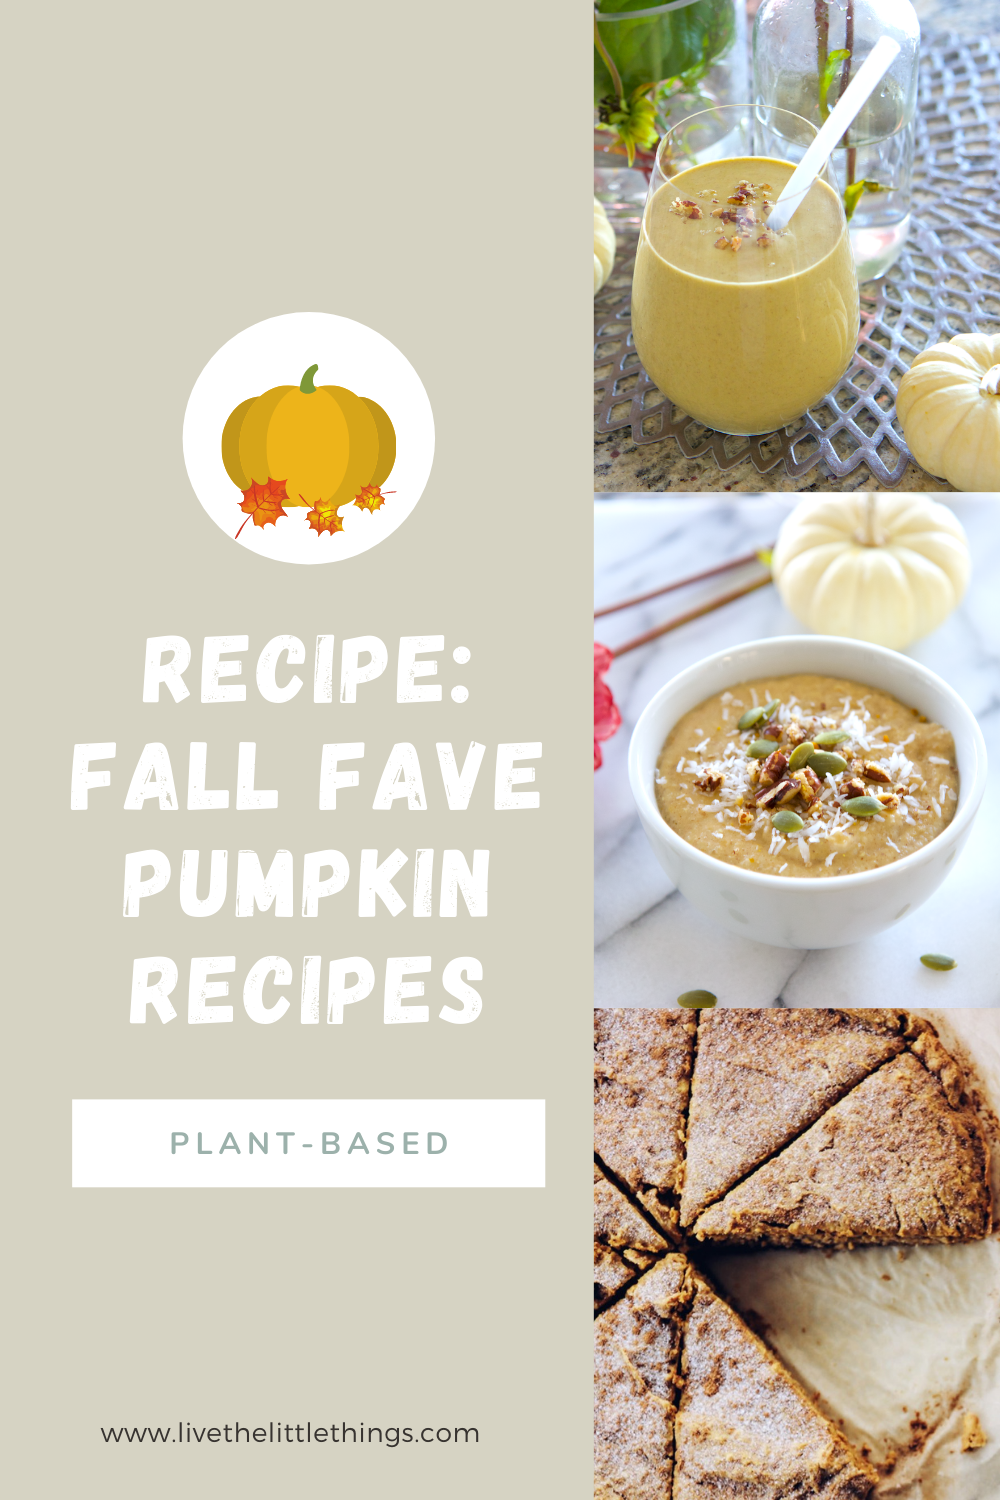 All Time Fave Mouthwatering Pumpkin Recipes to Try This Month